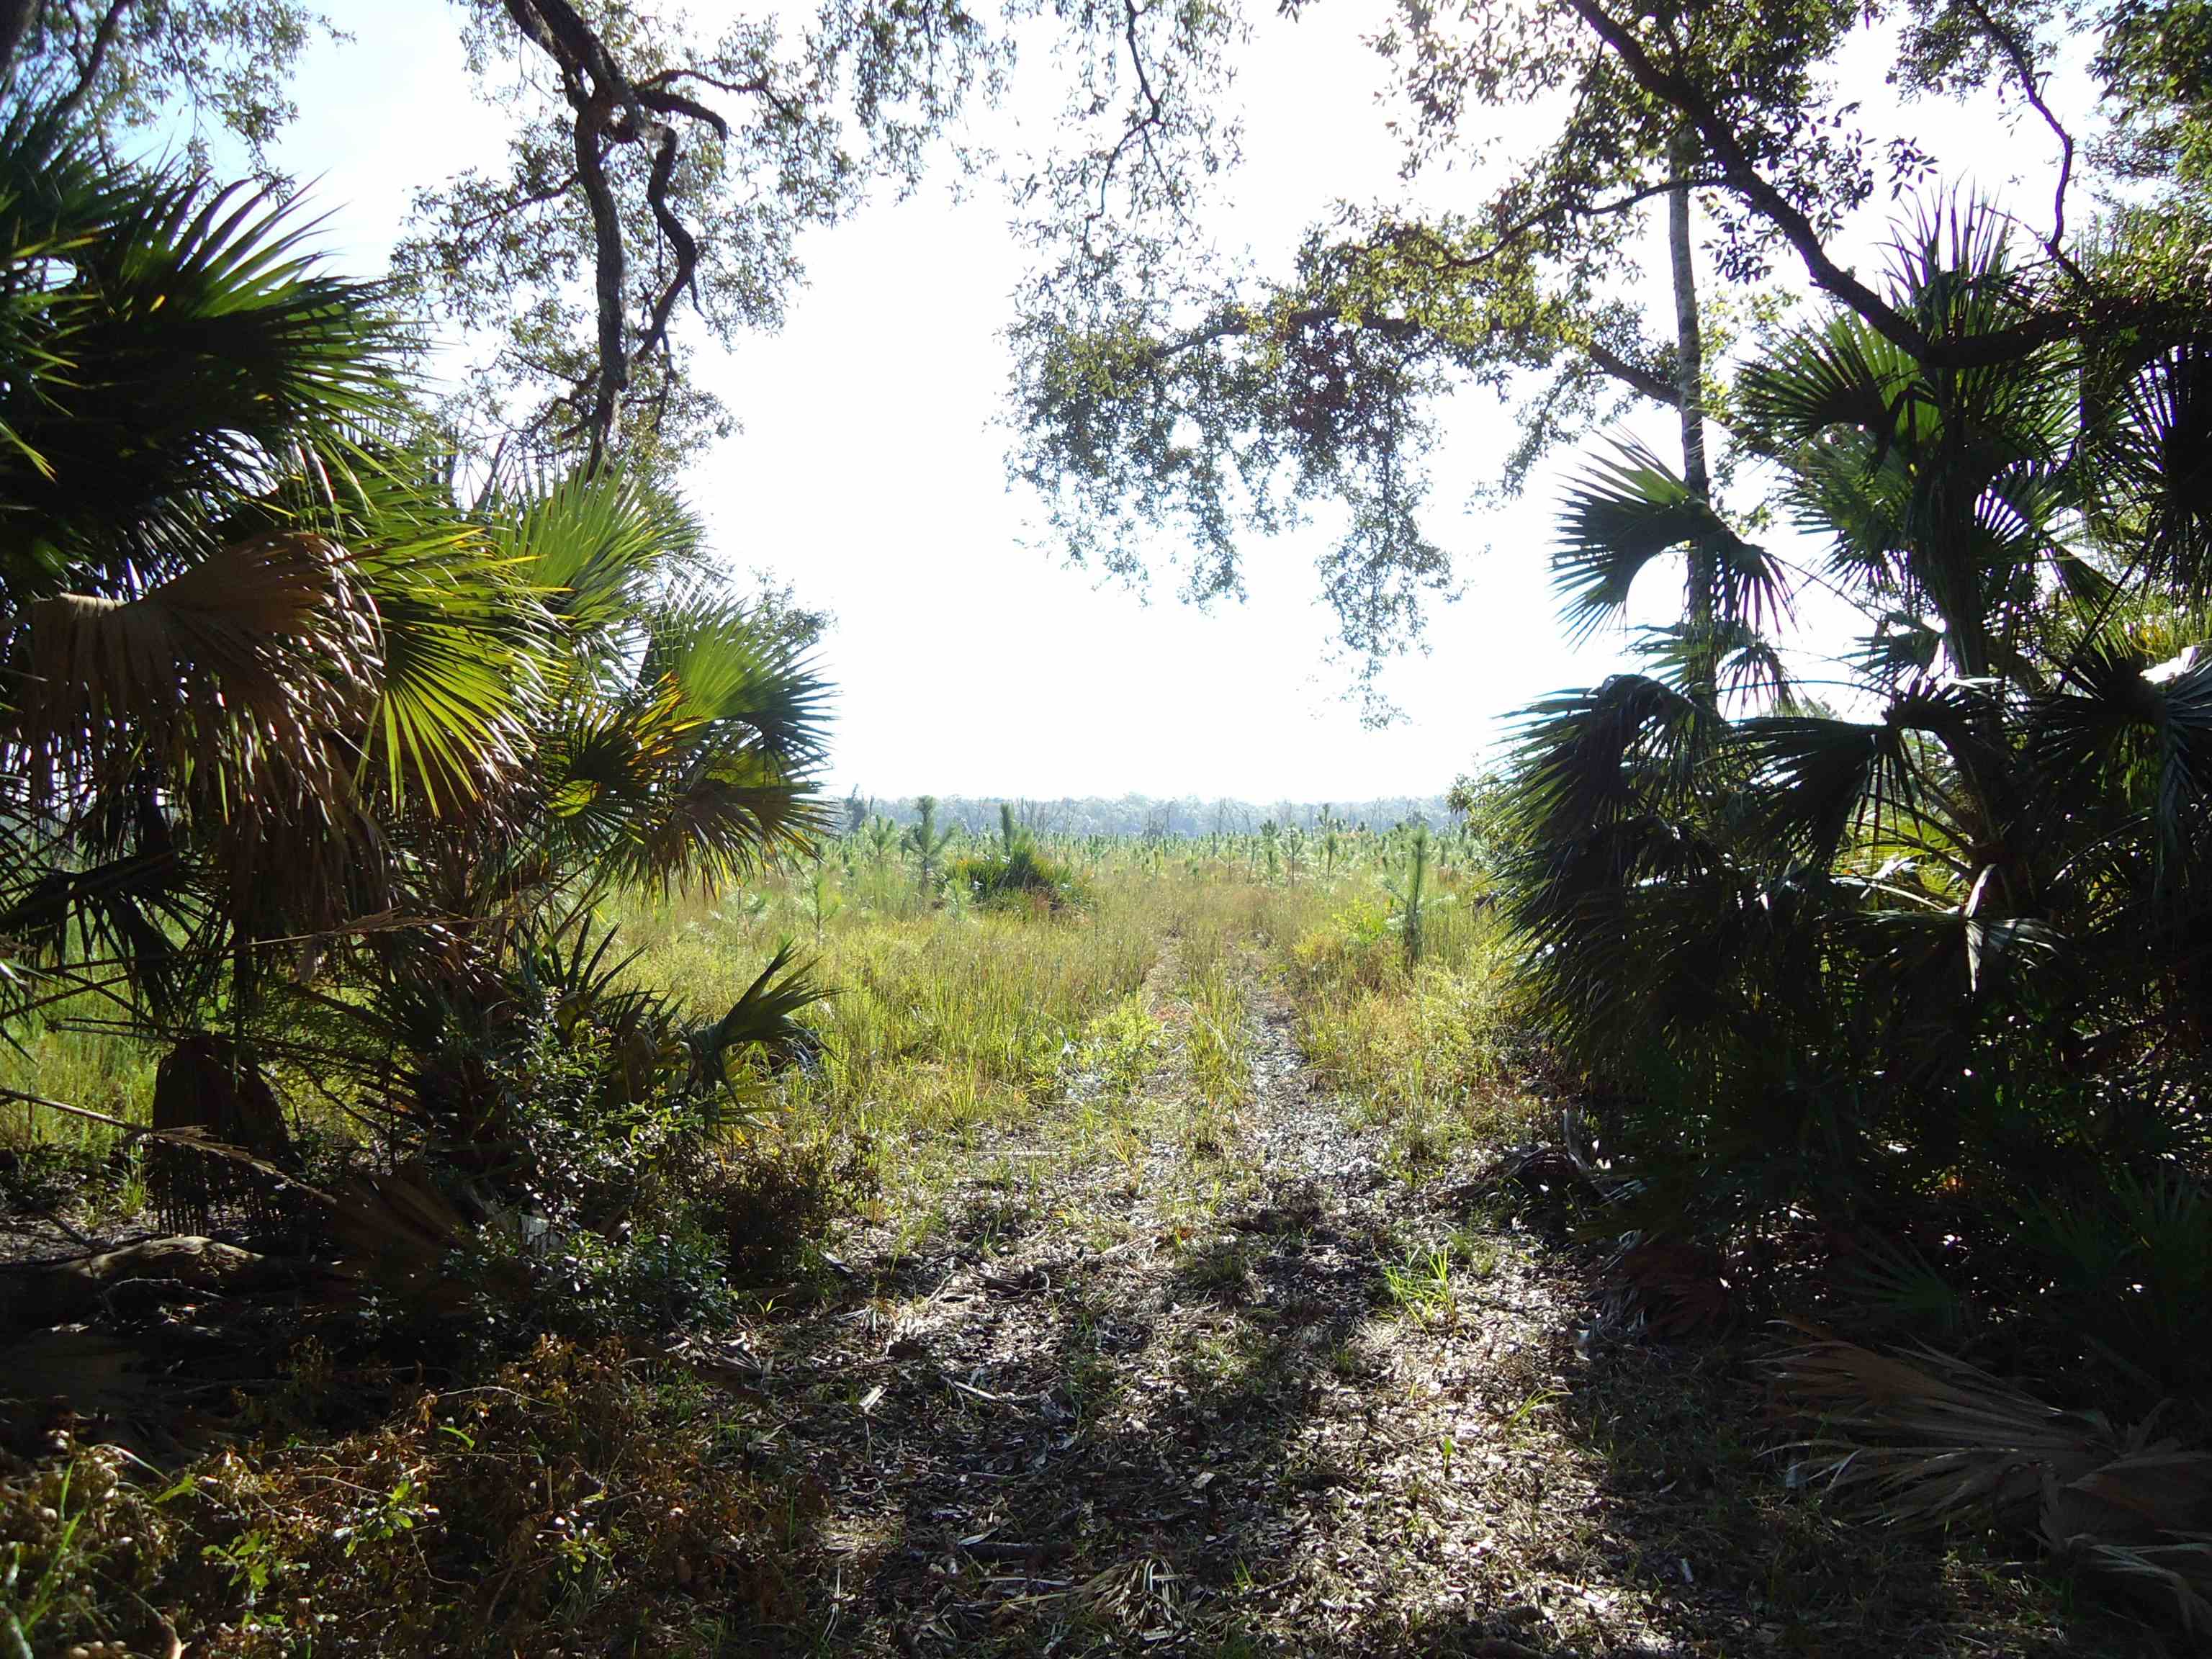 00 Econfina River Rd (CR 14),LAMONT,Florida 32336,Lots and land,Econfina River Rd (CR 14),363868